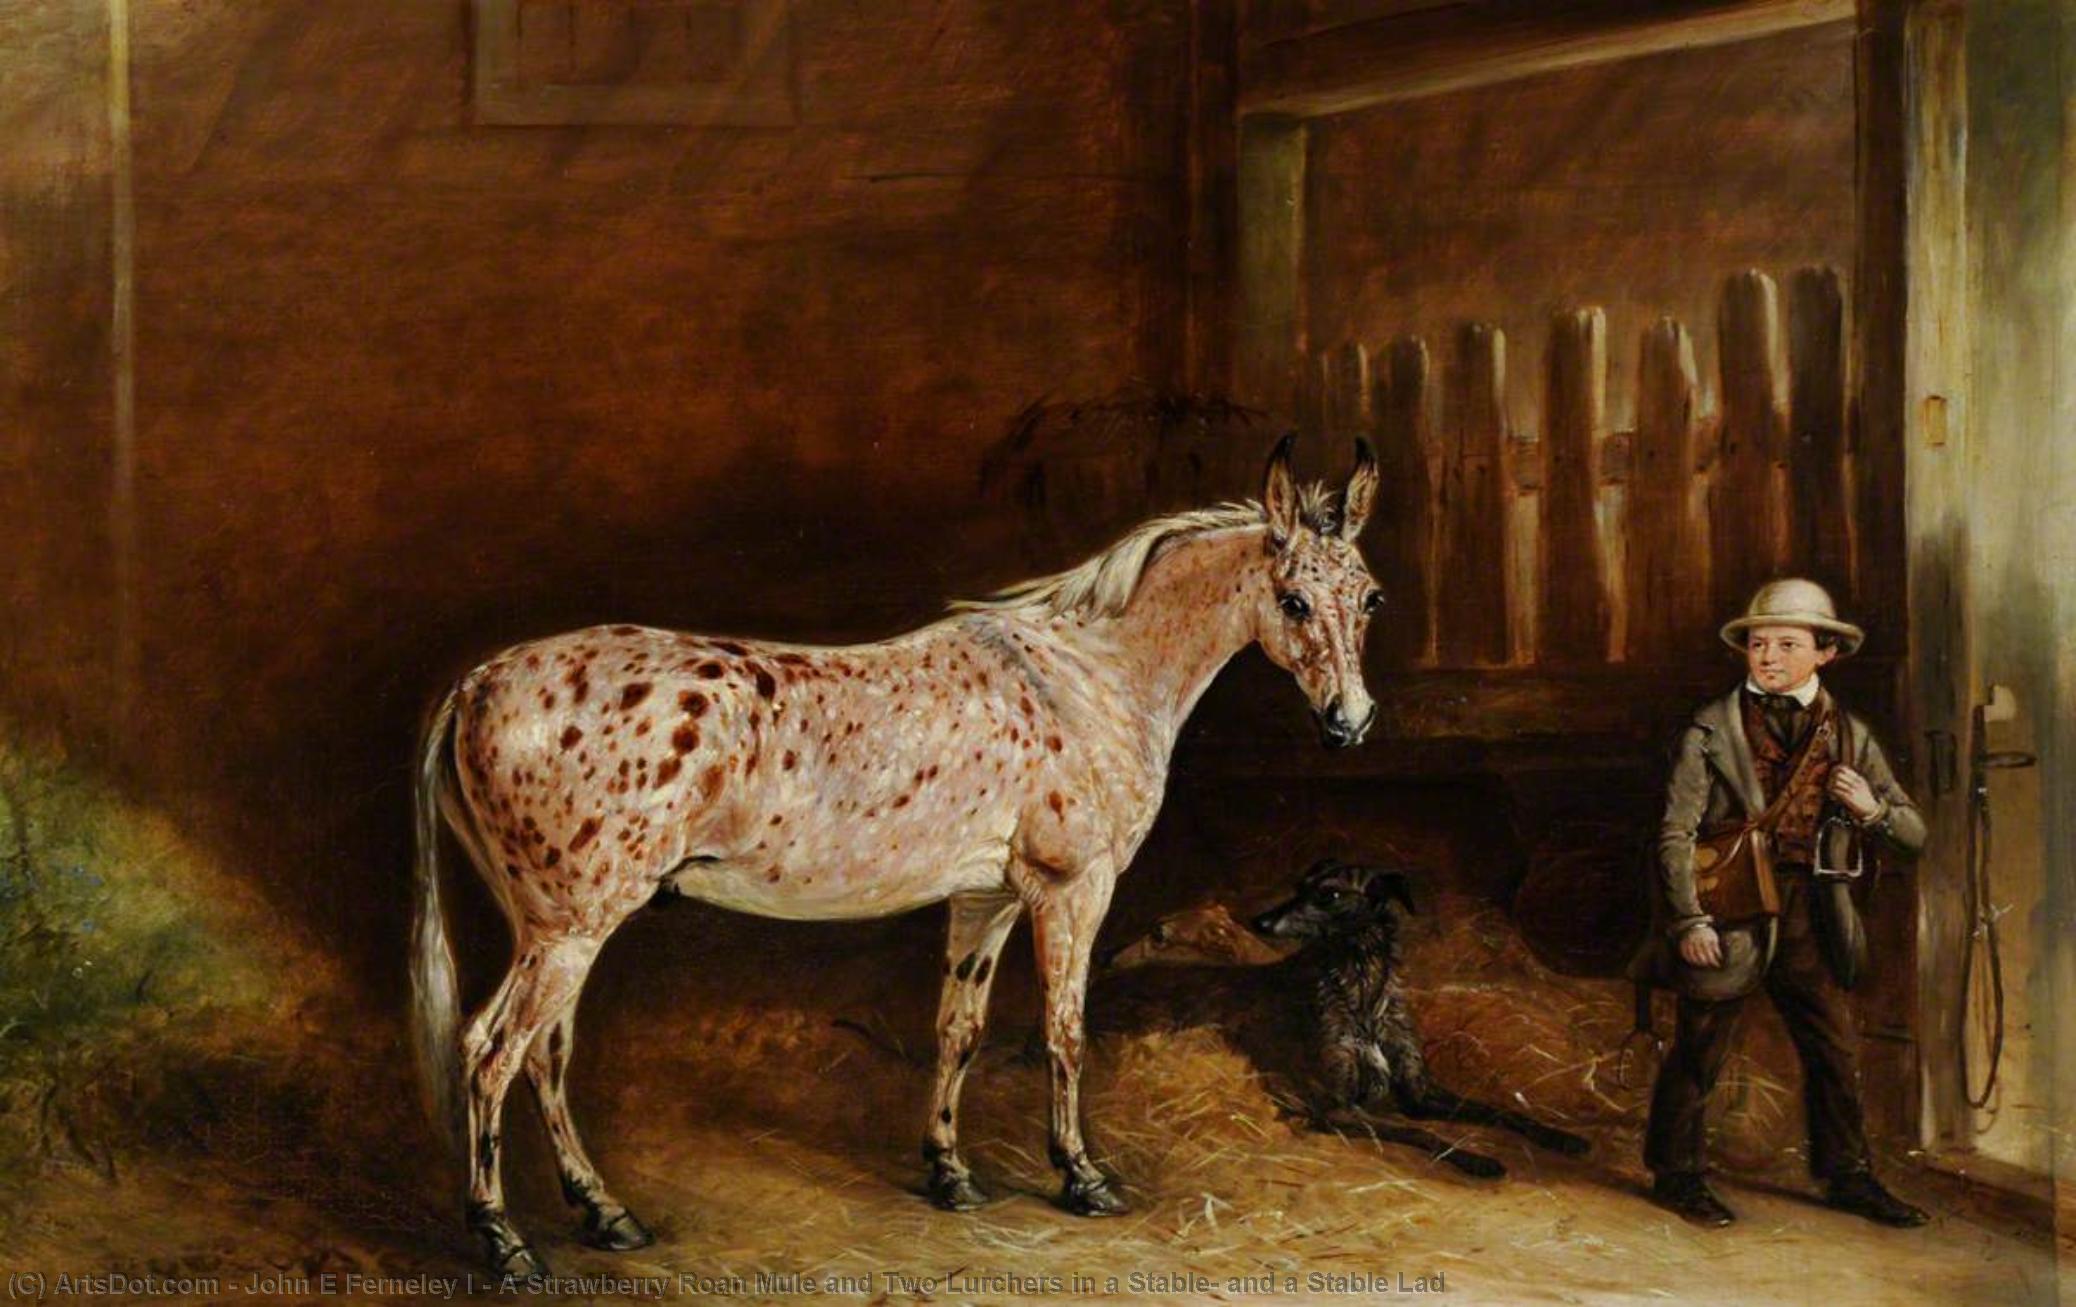 Buy Museum Art Reproductions A Strawberry Roan Mule and Two Lurchers in a Stable, and a Stable Lad, 1850 by John E Ferneley I | ArtsDot.com